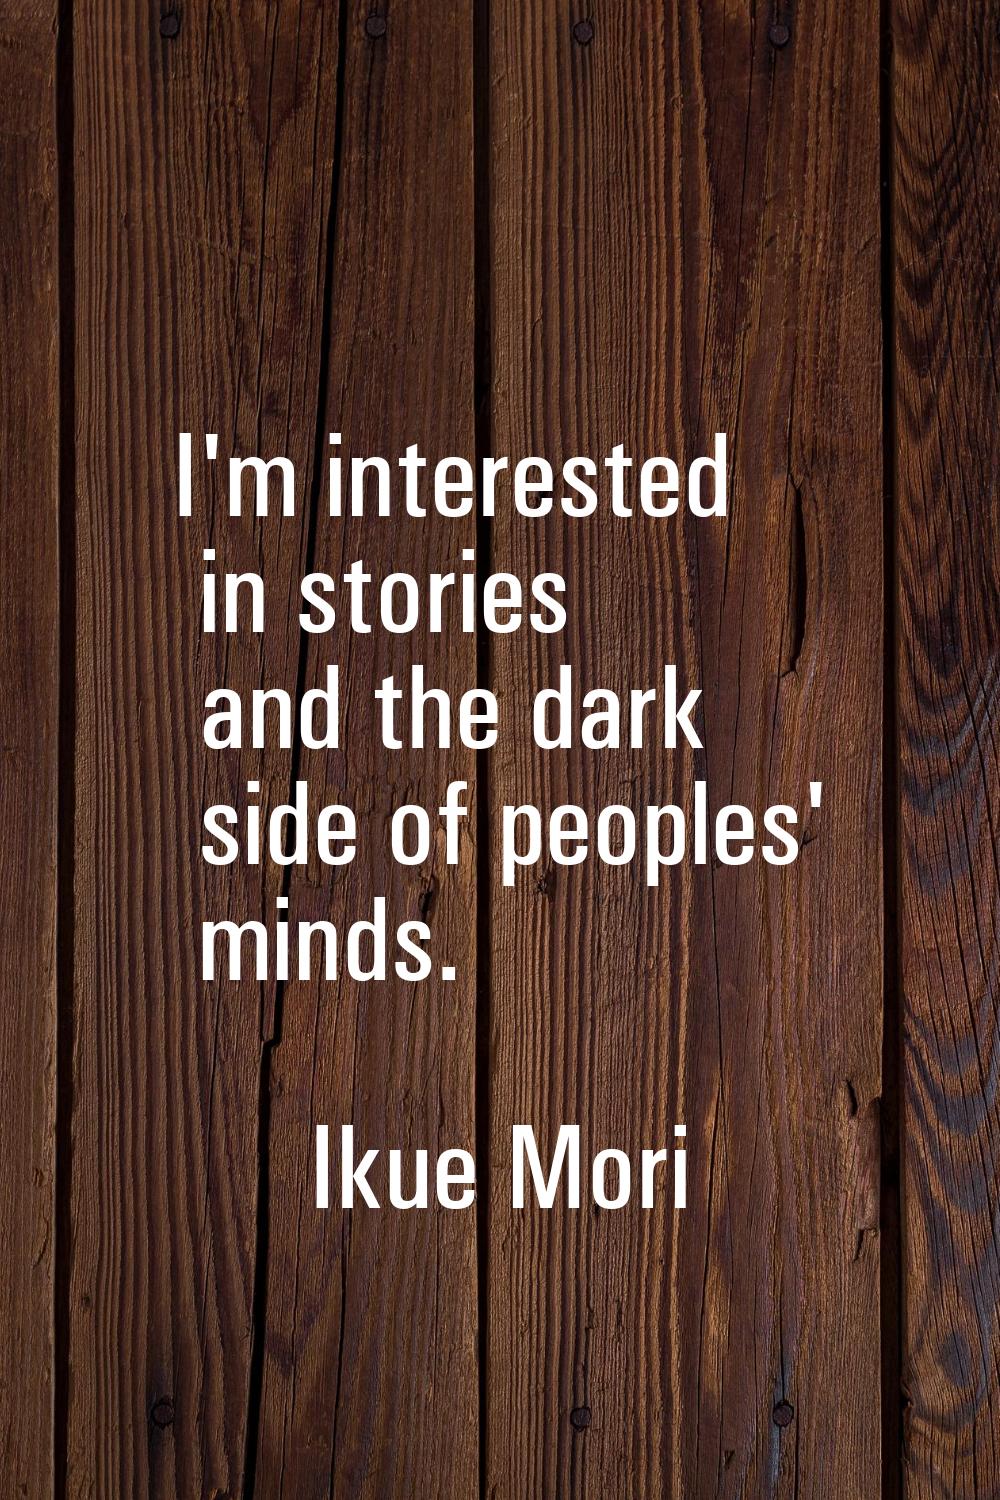 I'm interested in stories and the dark side of peoples' minds.